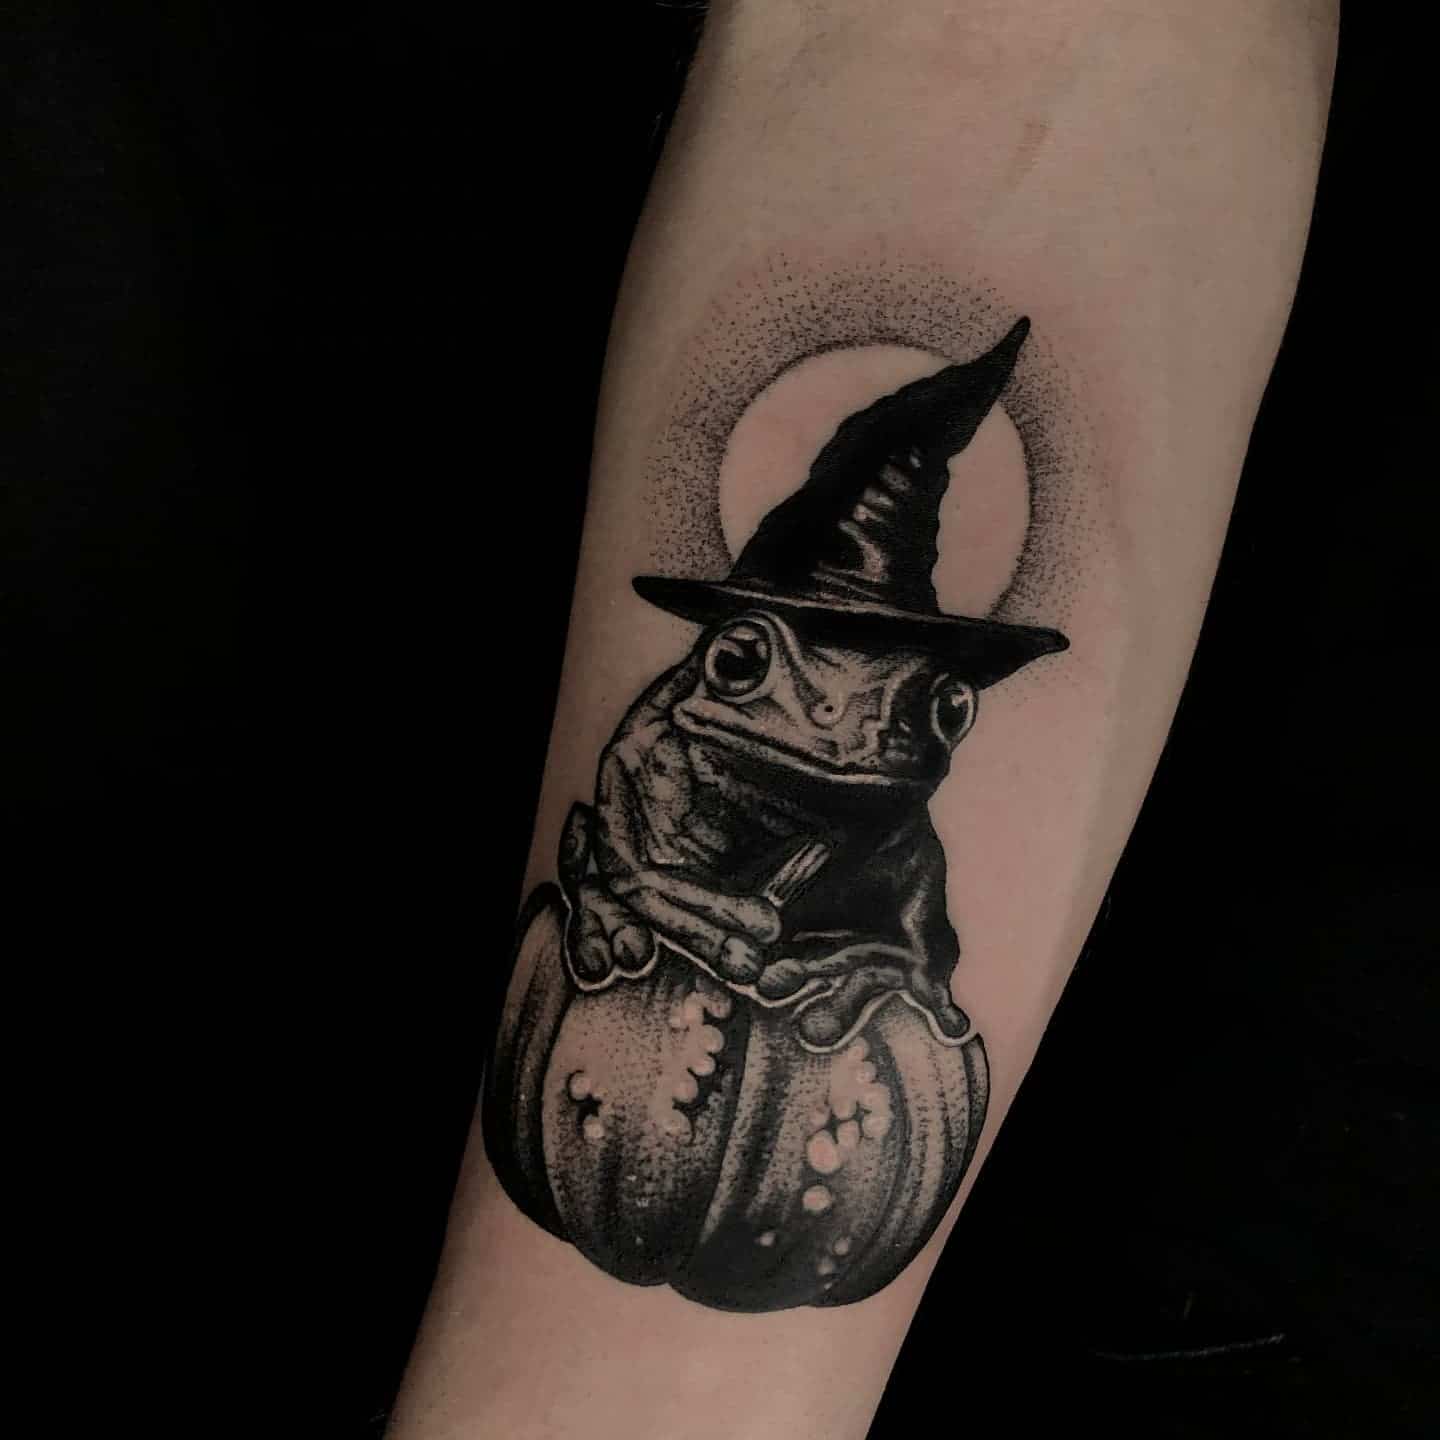 A toad in a witches hat sat on a pumpkin... fab choice for a first tattoo! Thanks so much for coming Jordan! Tattoo by Liz 🖤

lizminellitattoo           